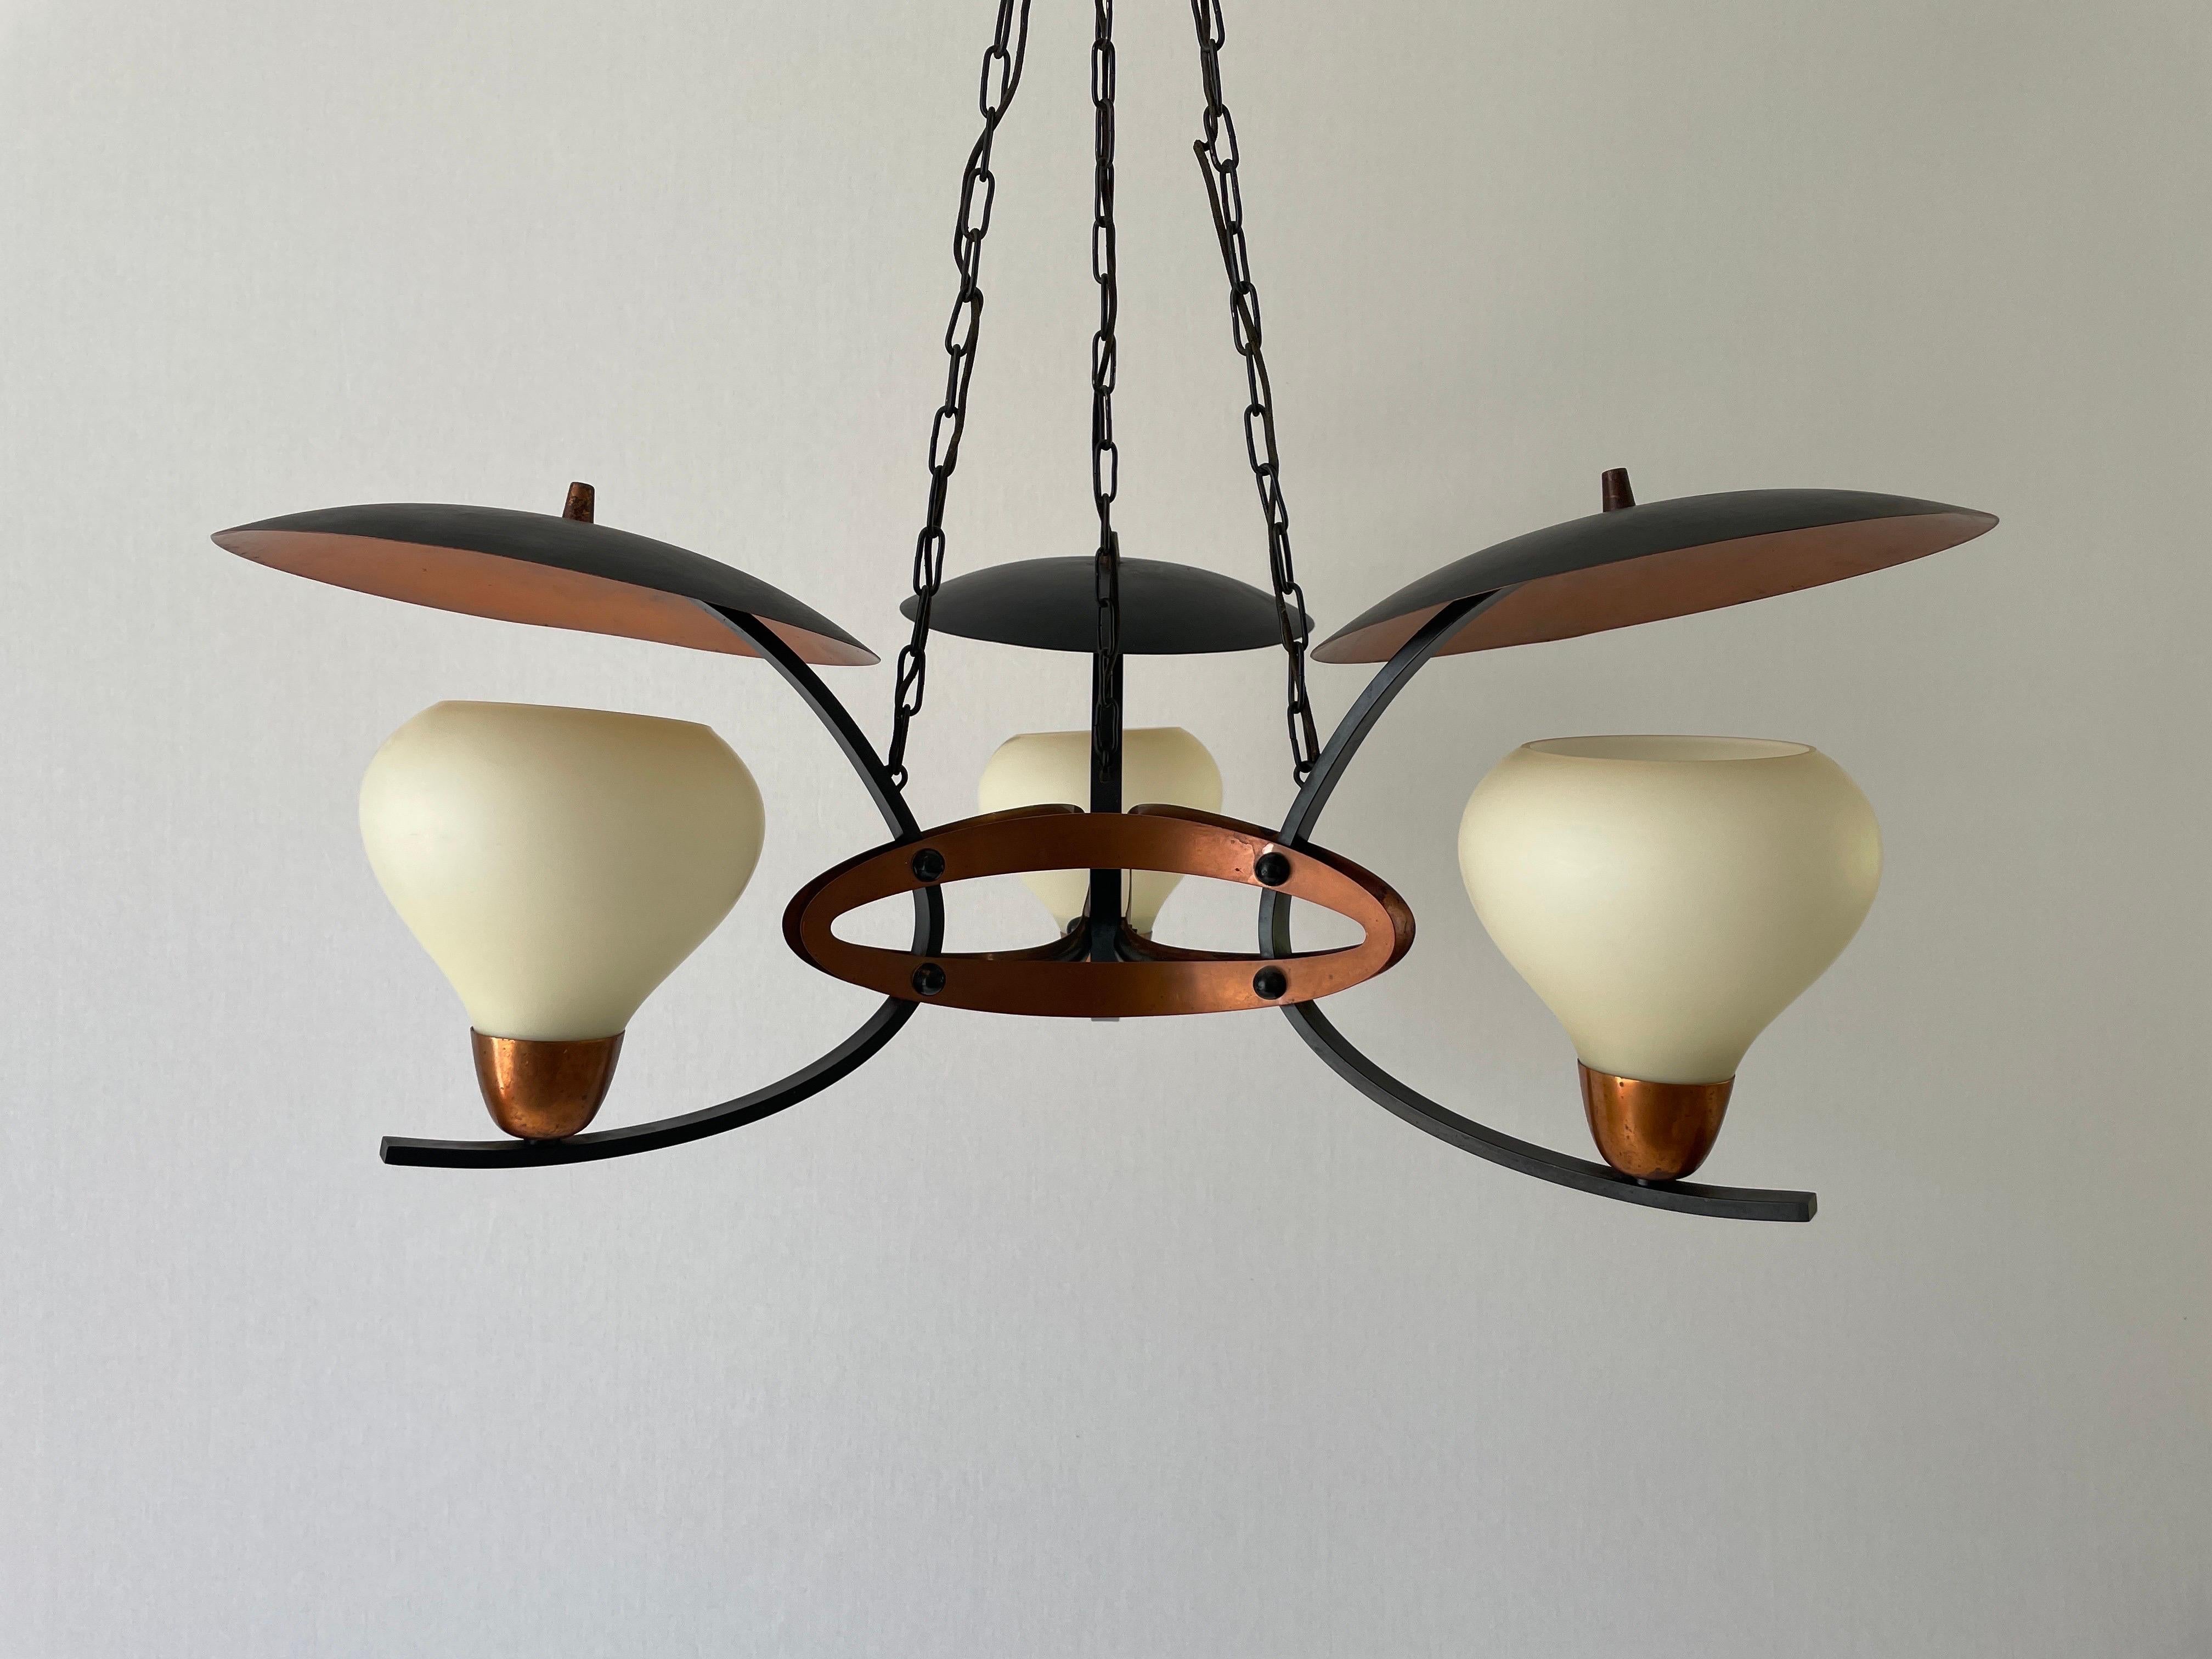 3-armed Glass and Copper Black Metal Chandelier, 1960s, Germany

2 pieces available 


This lamp works with 3 x E14 light bulbs.

Measures: 
Height: 74 cm
Overall shade diameter and height: 70 cm and 32 cm